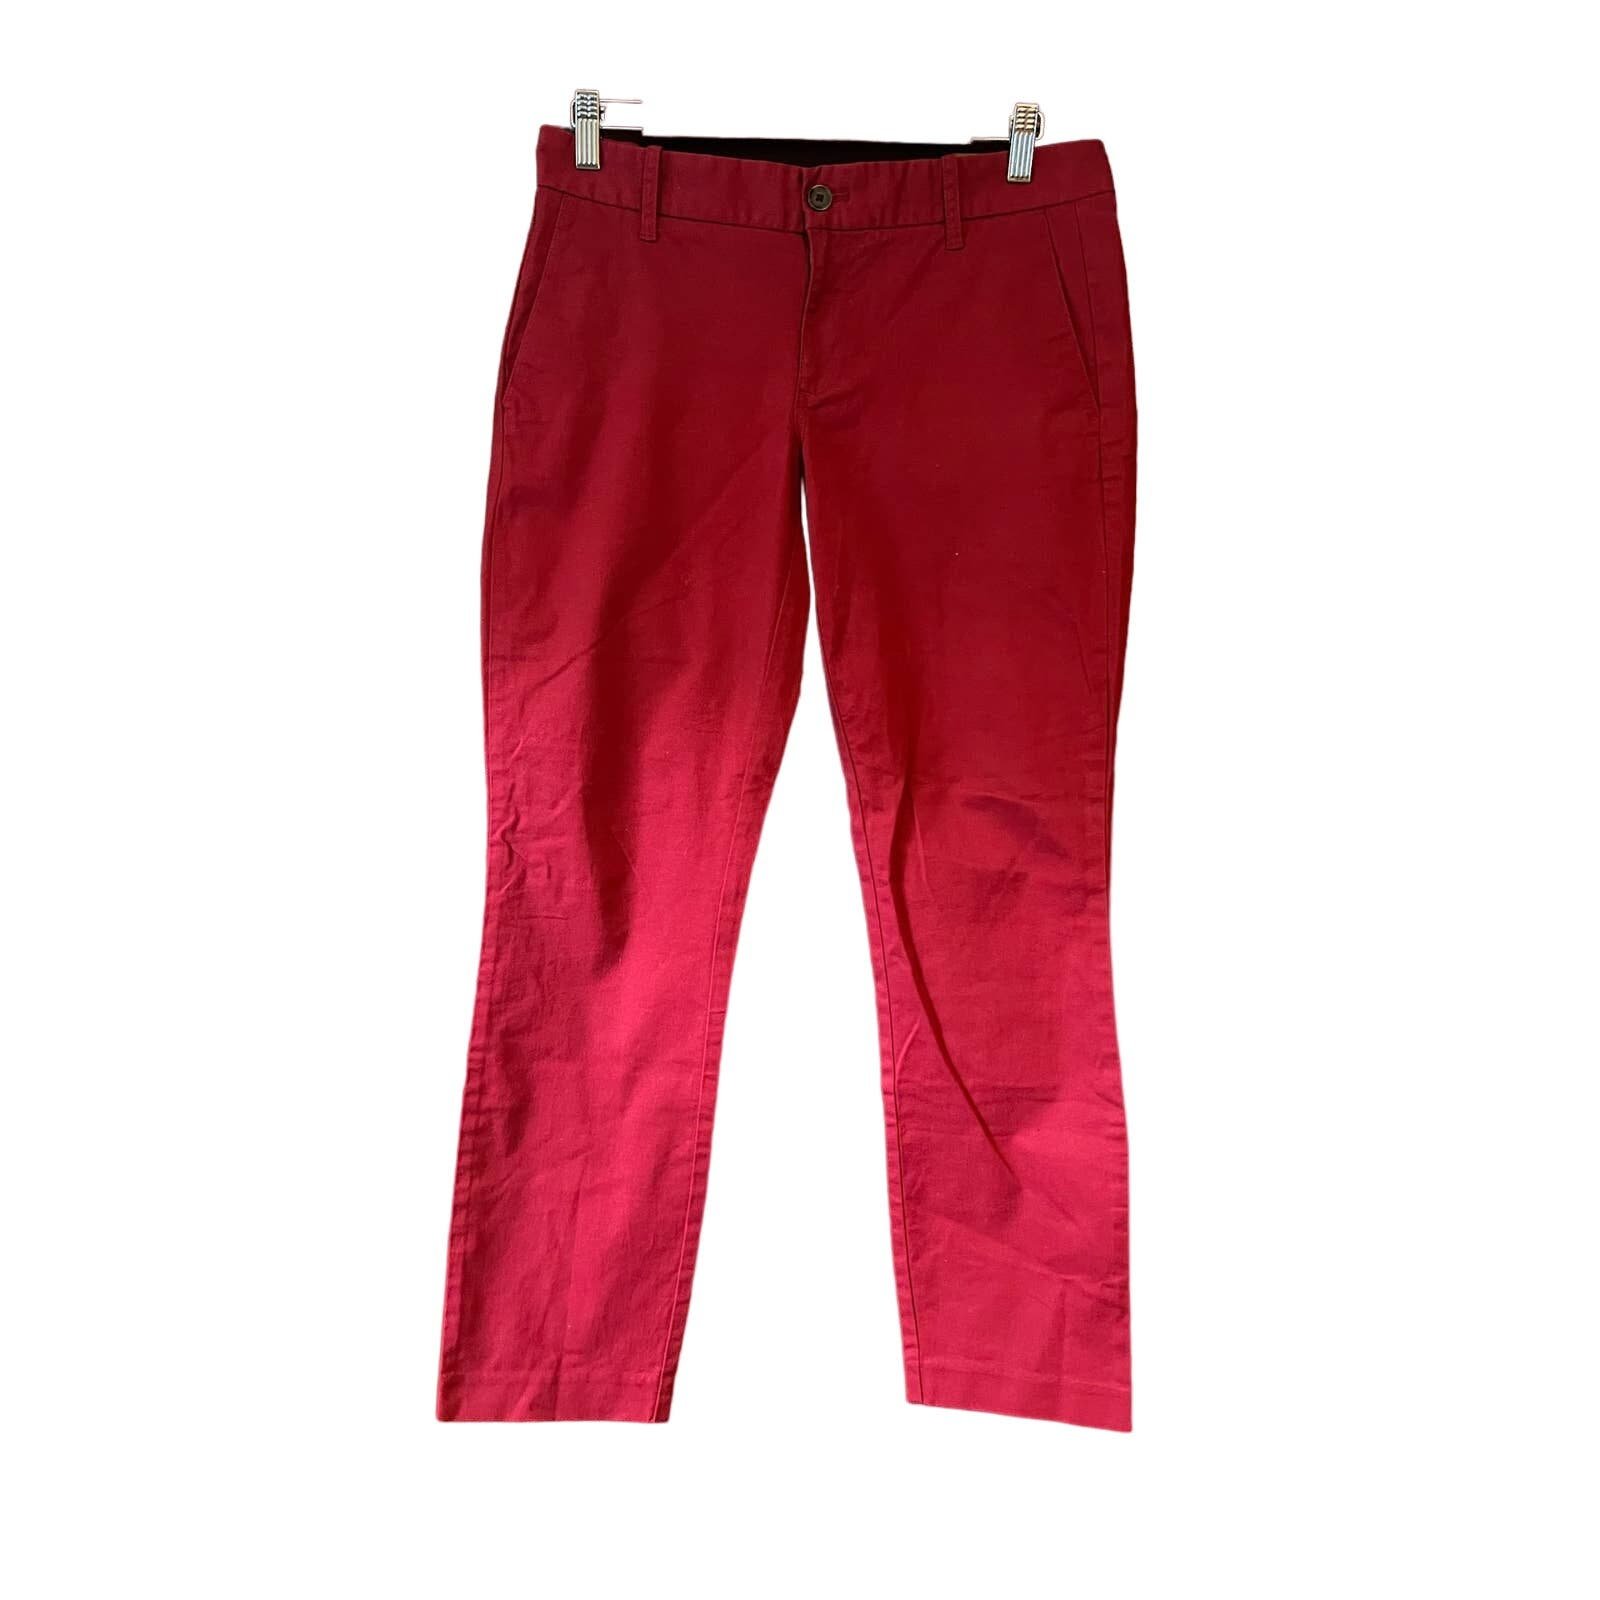 big discount J. Crew Women´s Stretch Mid Rise Straight Leg Frankie Chino Pant Red Size 6 HNMNp80Yv US Outlet